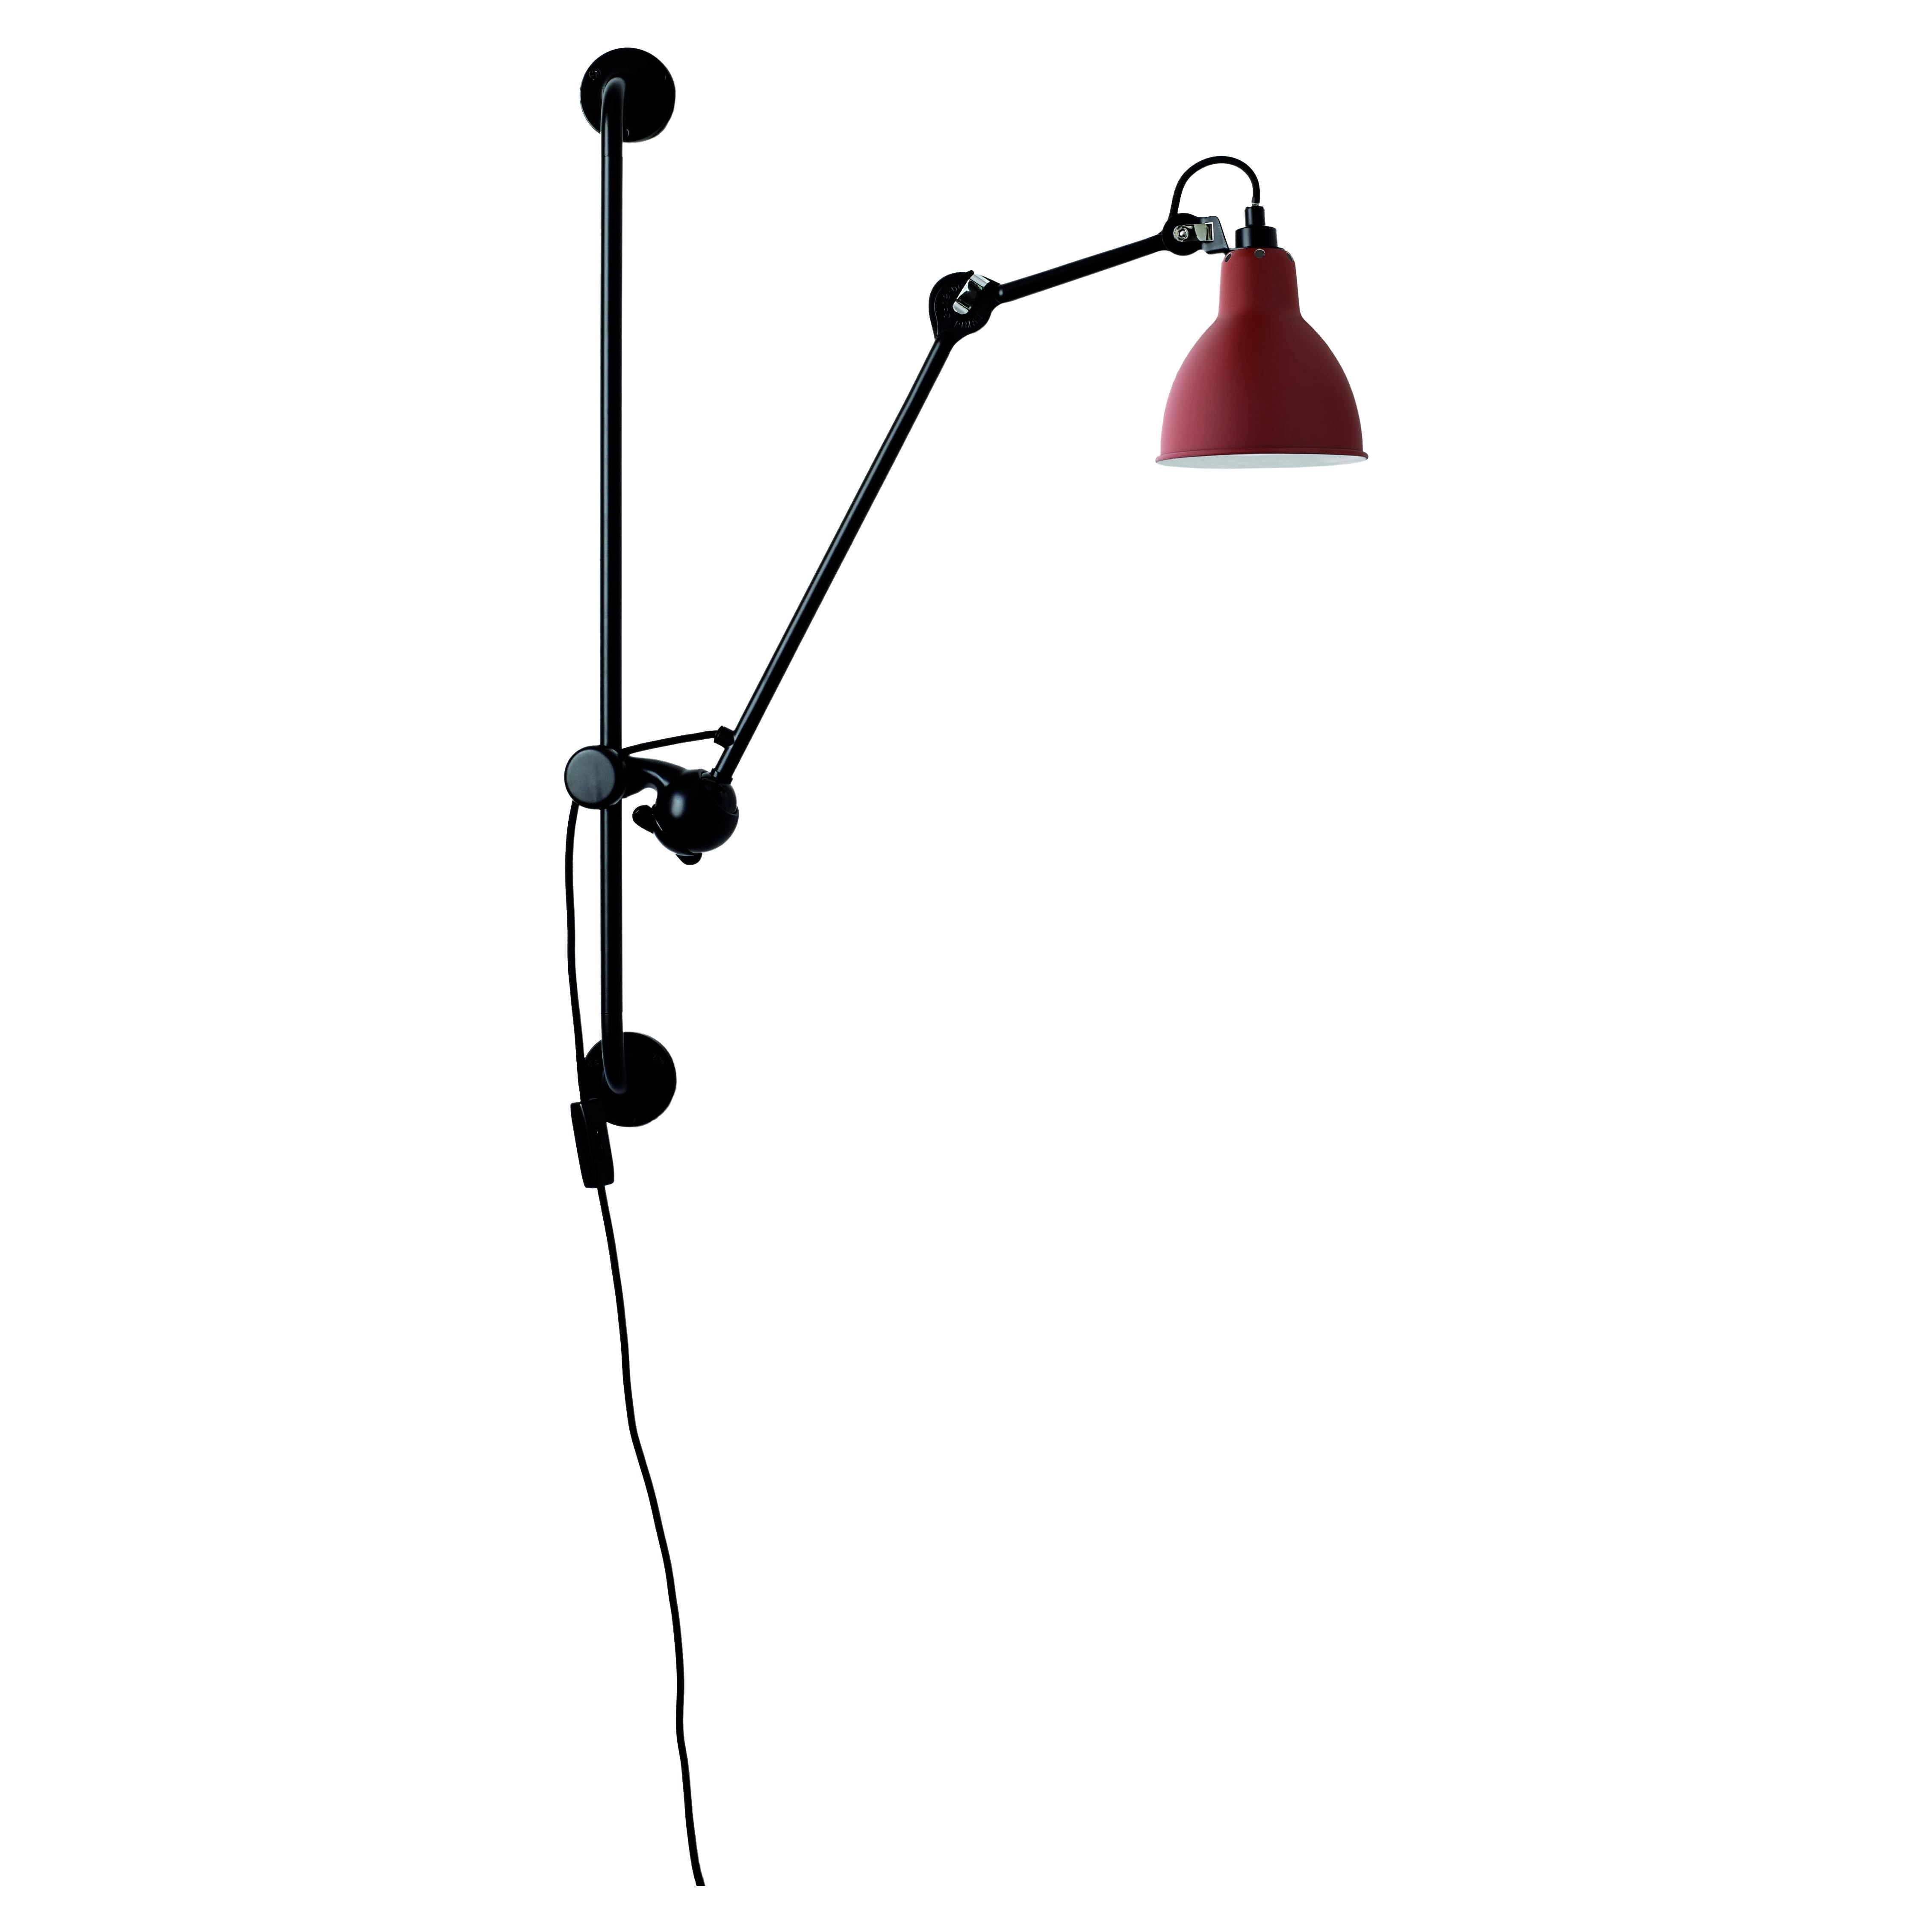 DCW Editions La Lampe Gras N°210 Wall Lamp in Black Arm and Red Shade For Sale